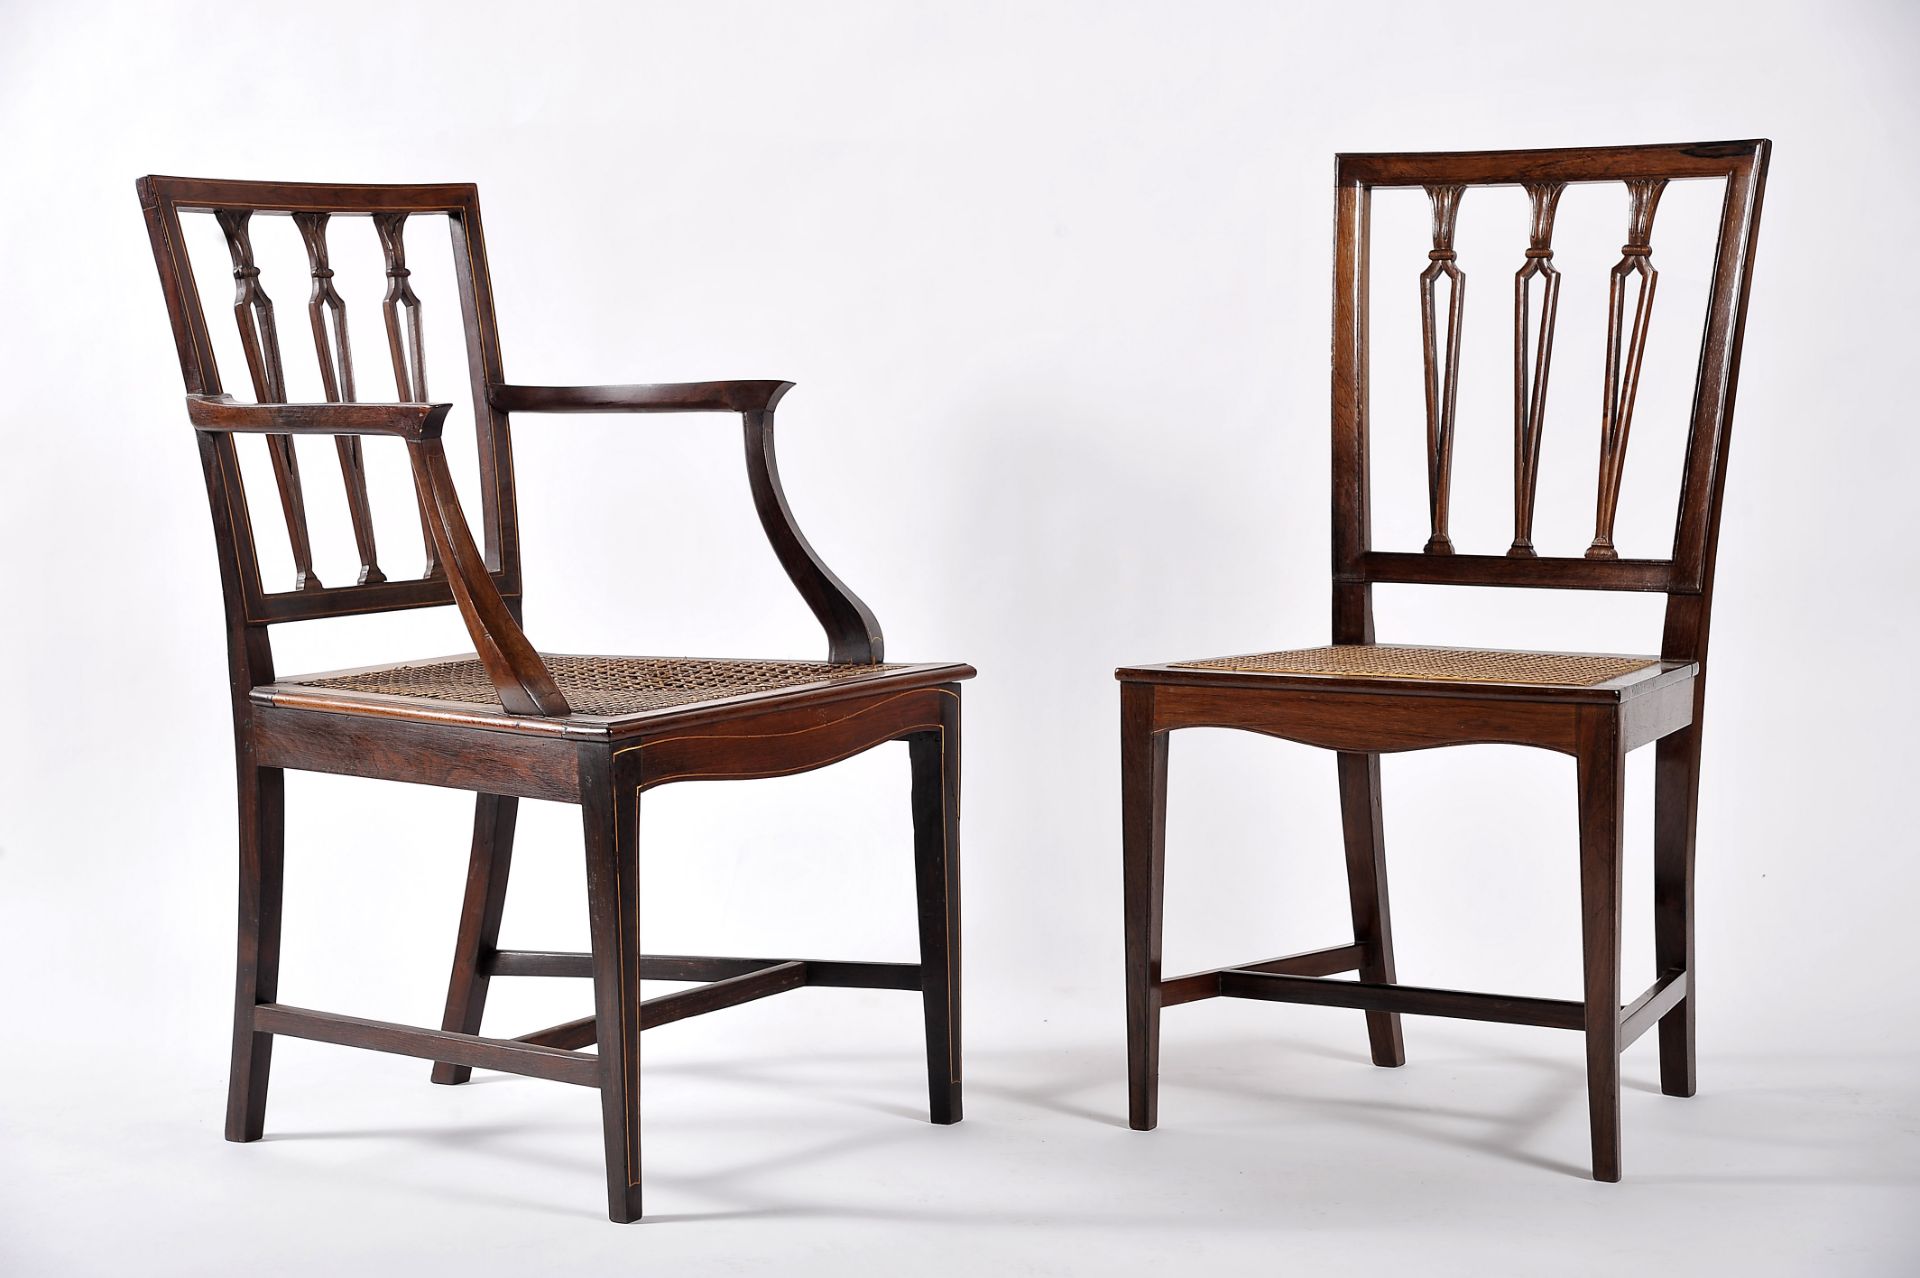 A set of twelve chairs including two armchairs - Image 3 of 3